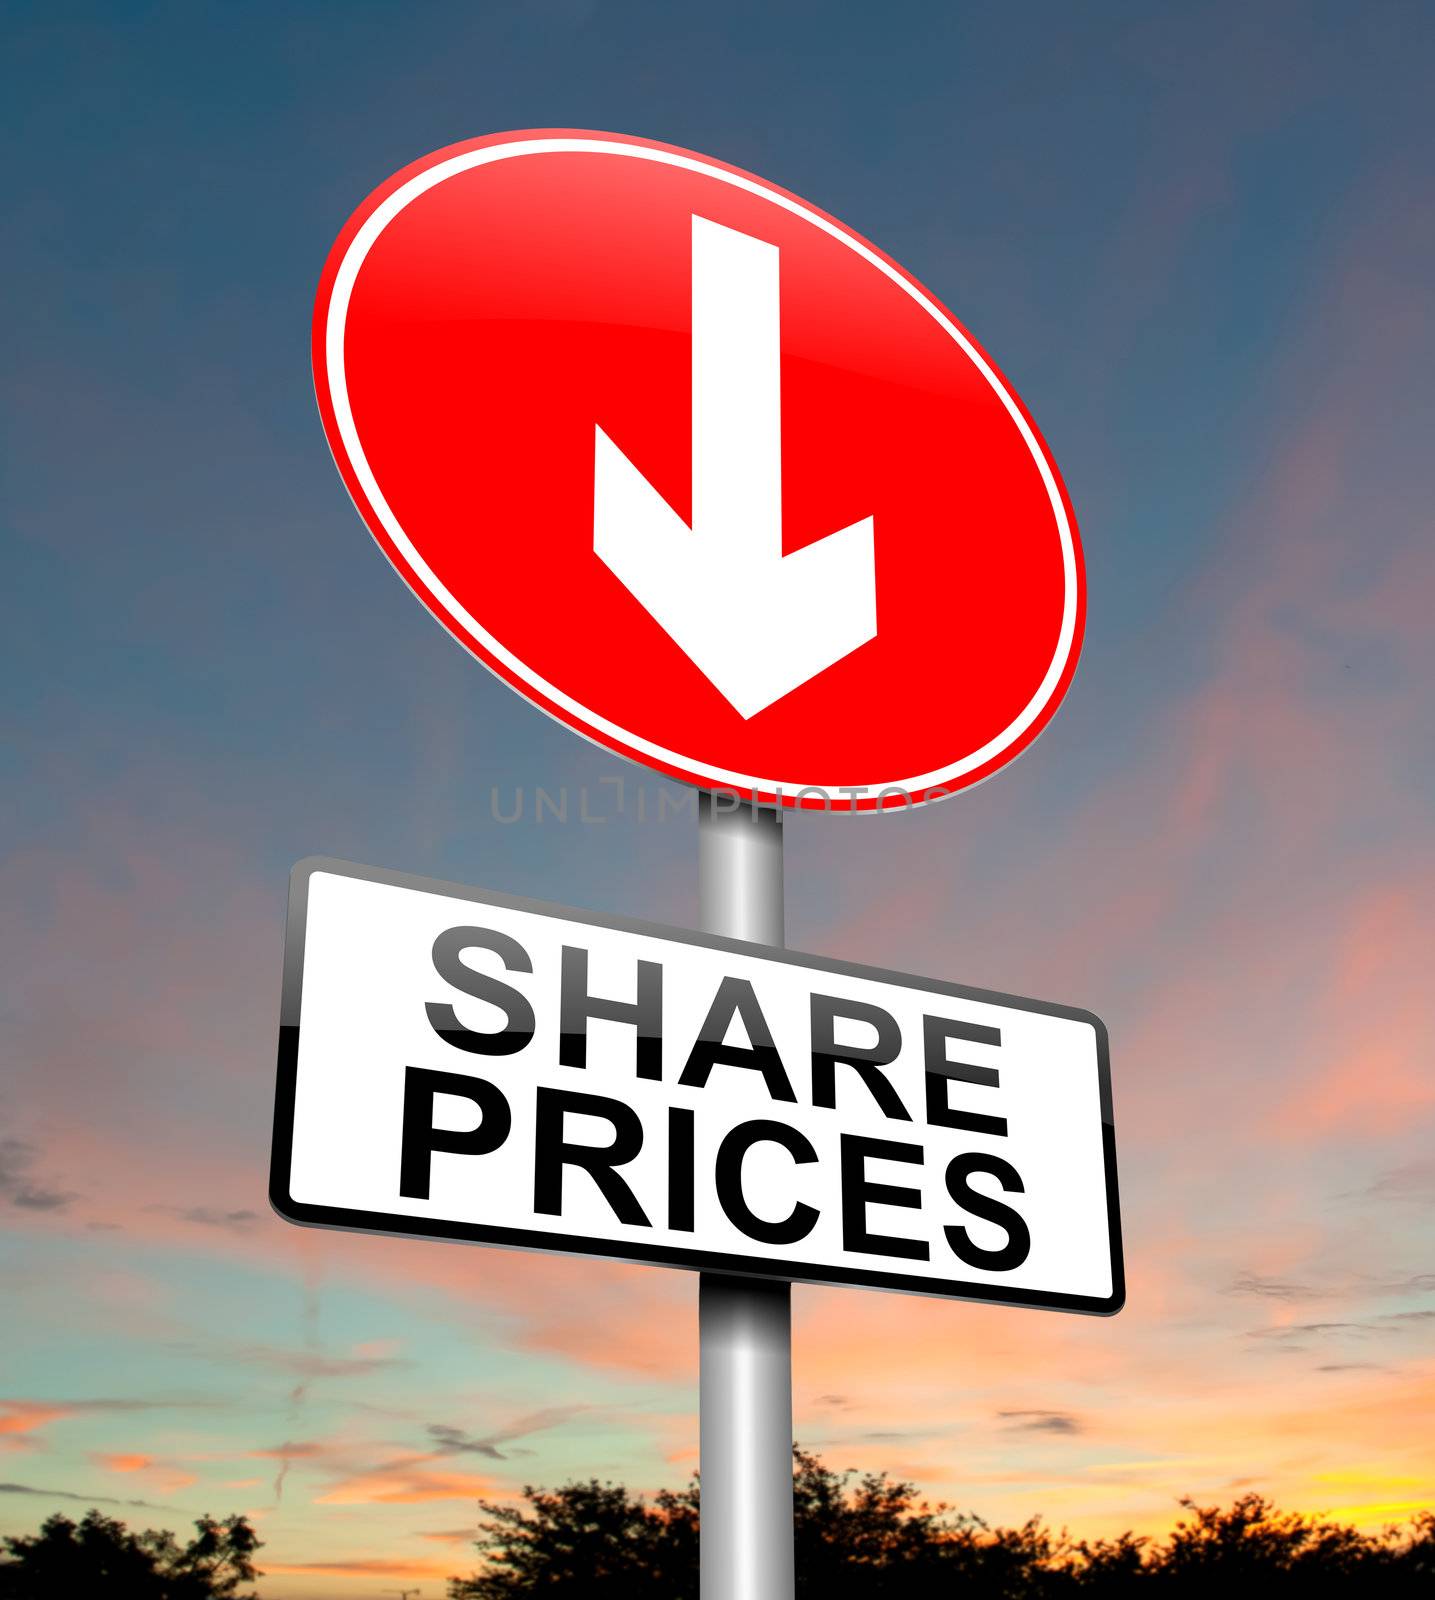 Illustration depicting a roadsign with a share price concept. Dusk sky background.